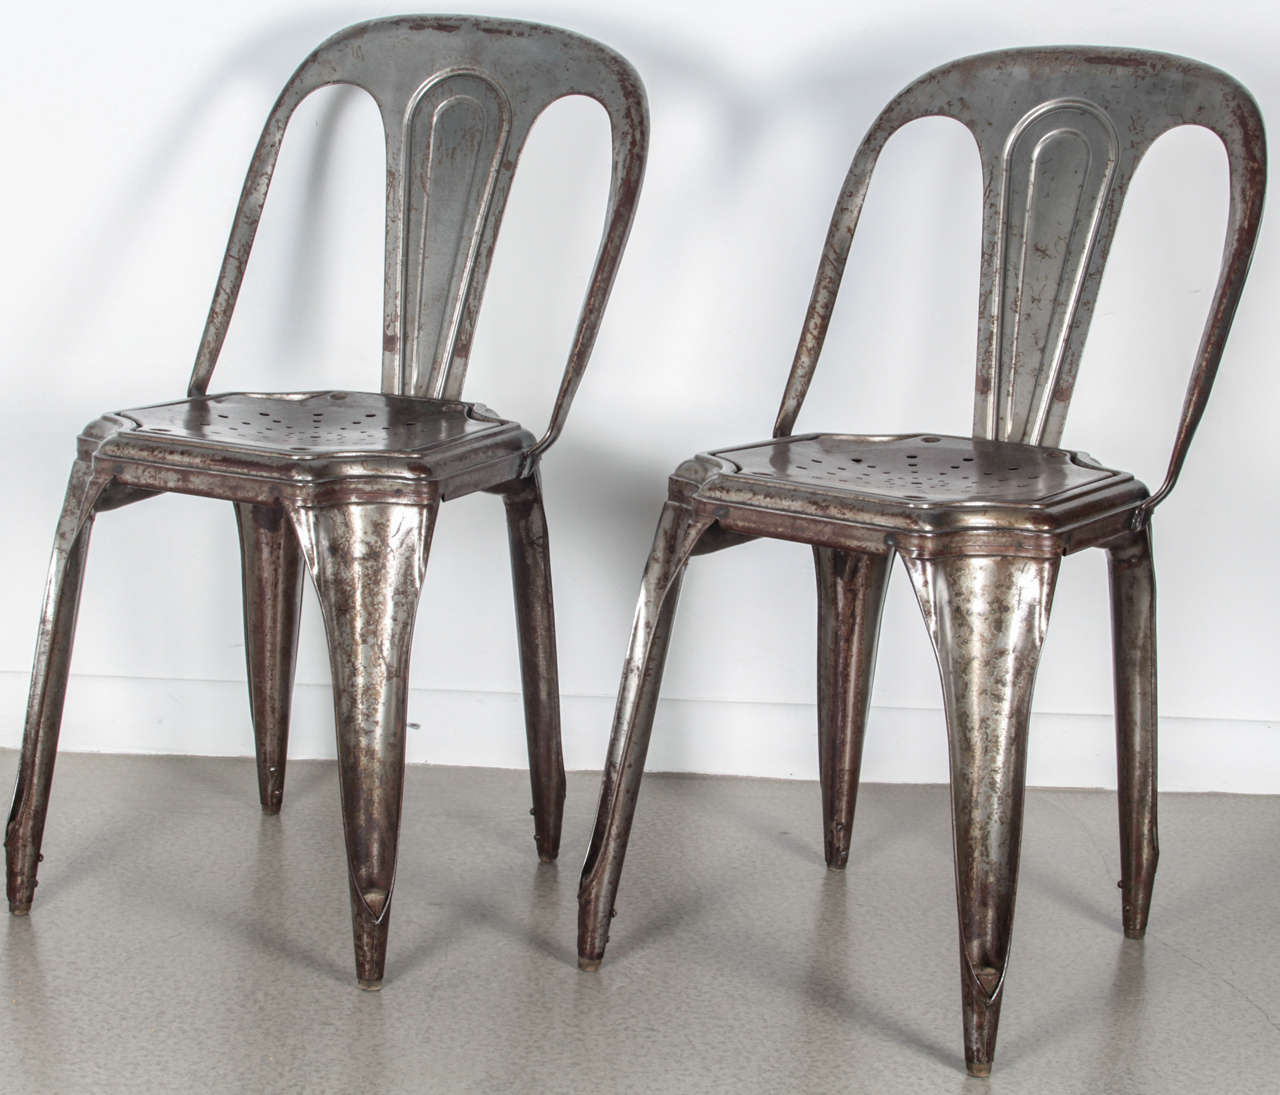 A set of four vintage 1940s metal Tolix chairs. These are NOT reproductions. These vintage metal Tolix chairs are the ultimate statement piece. They have been stripped and polished to reveal their natural beauty, making them perfect for any modern